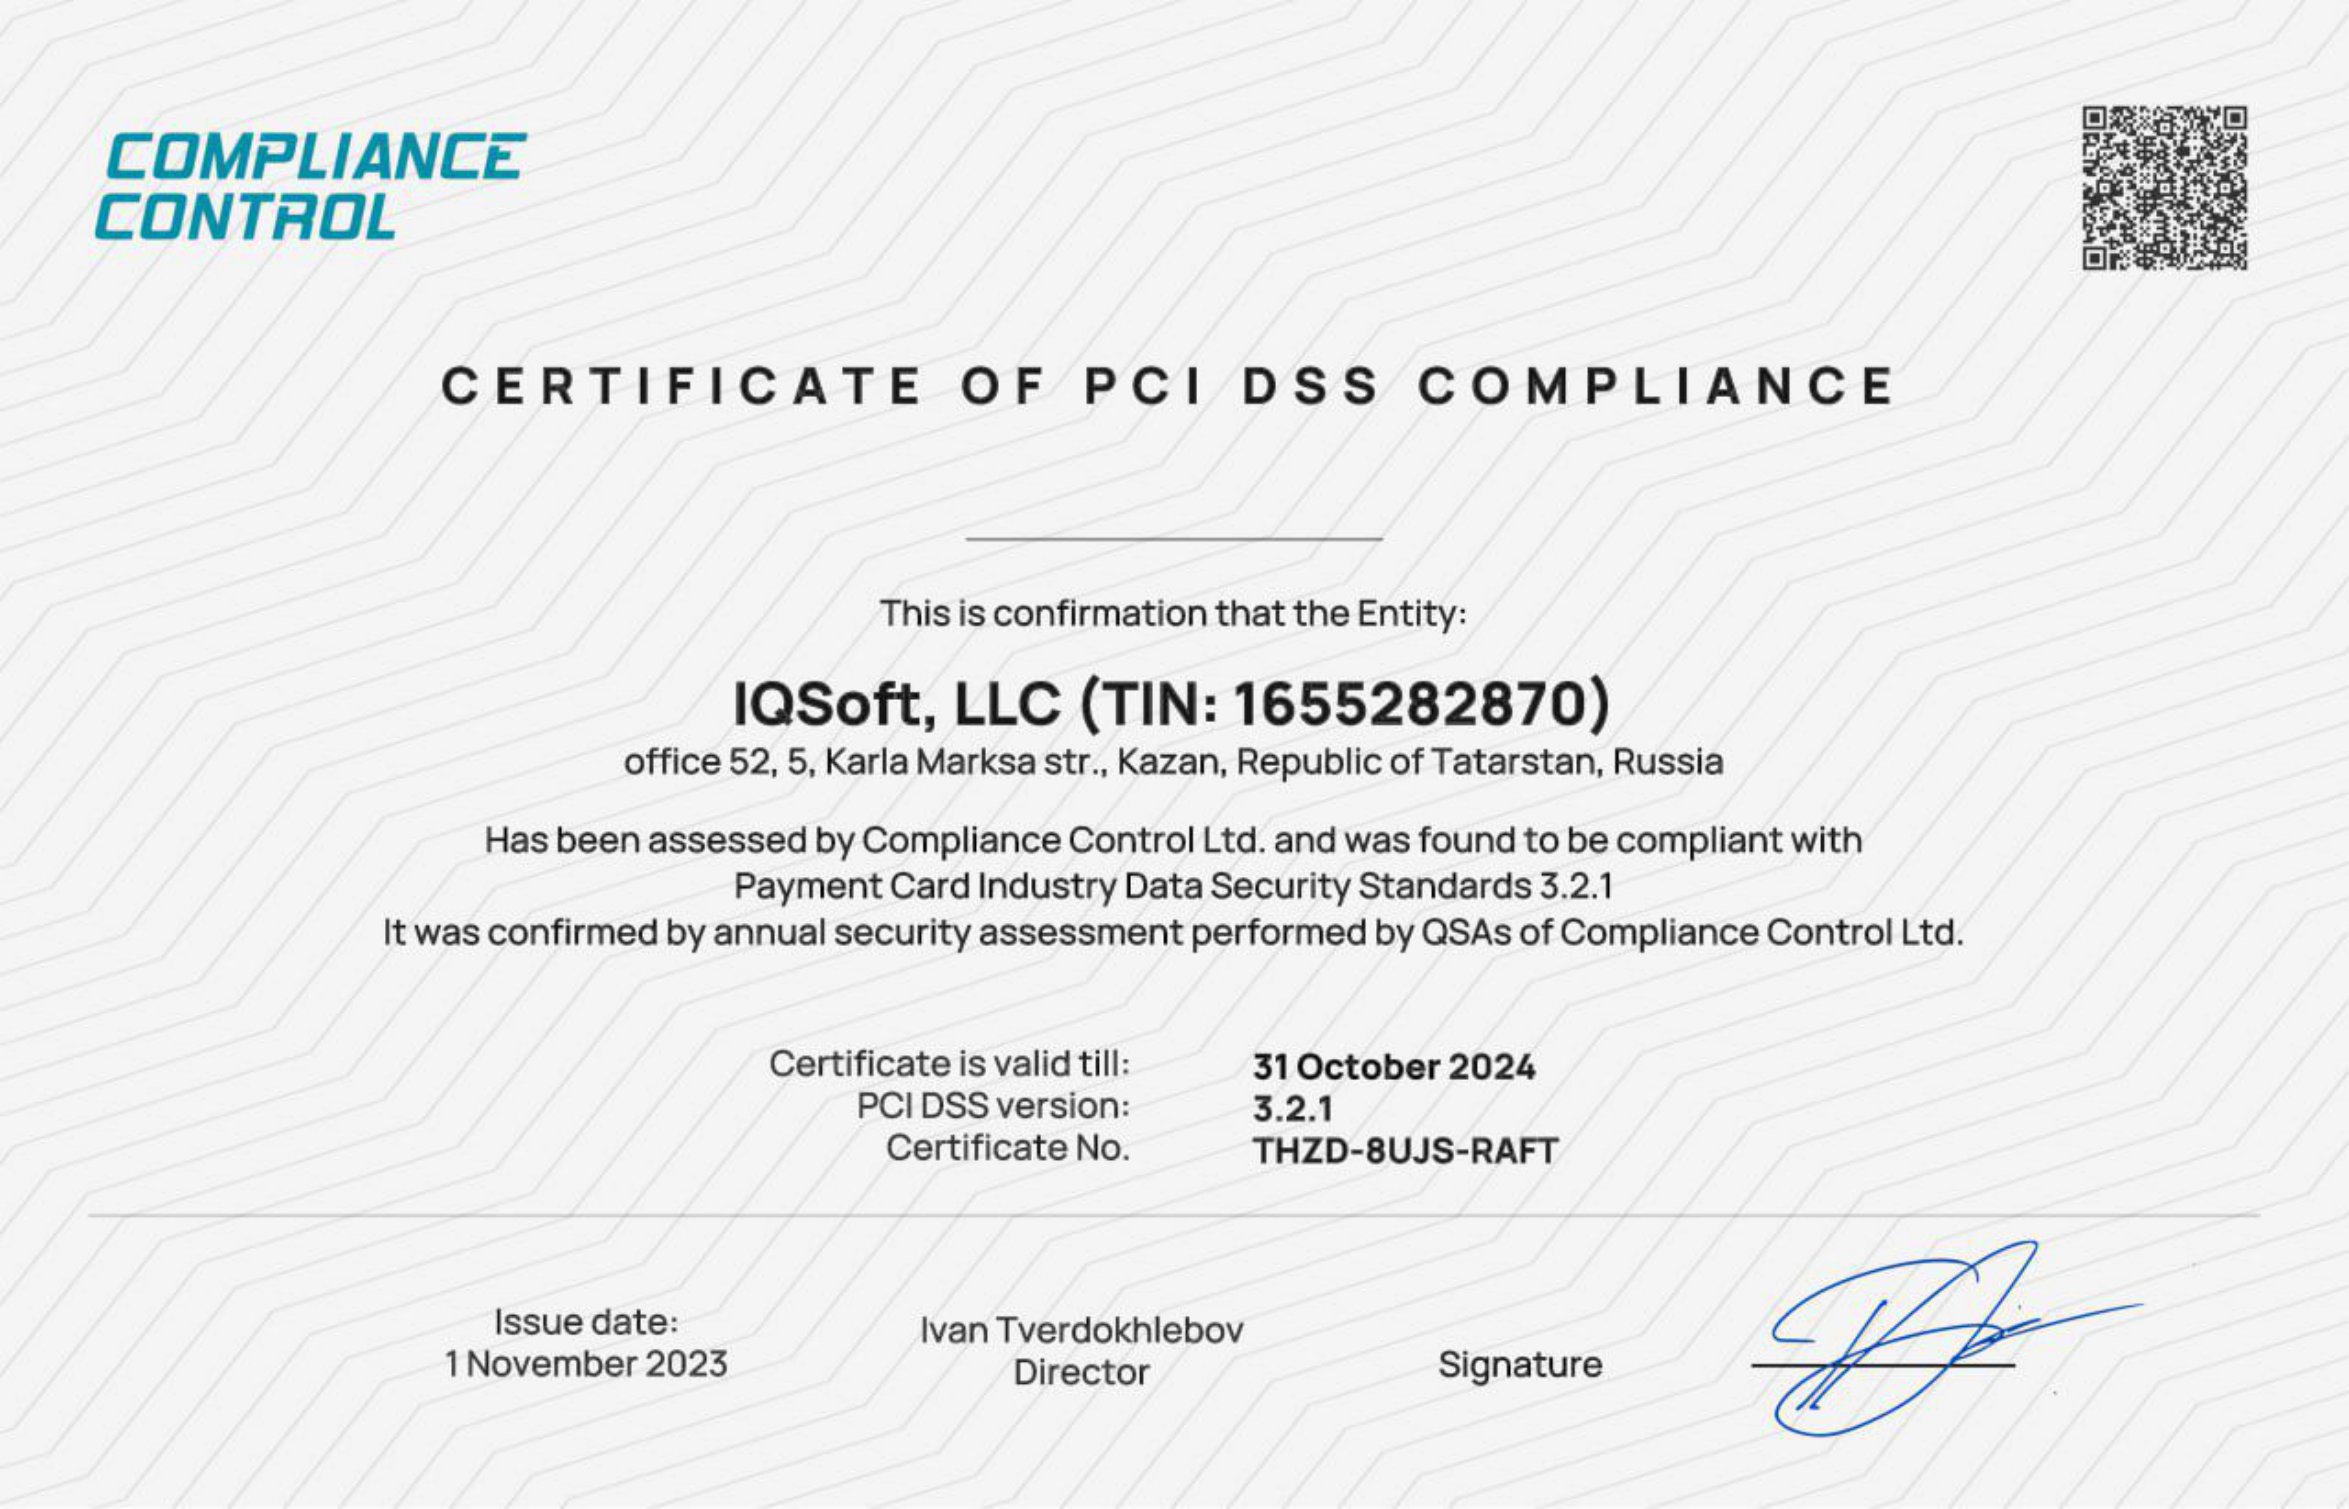 Certificate of PCI DSS compliance